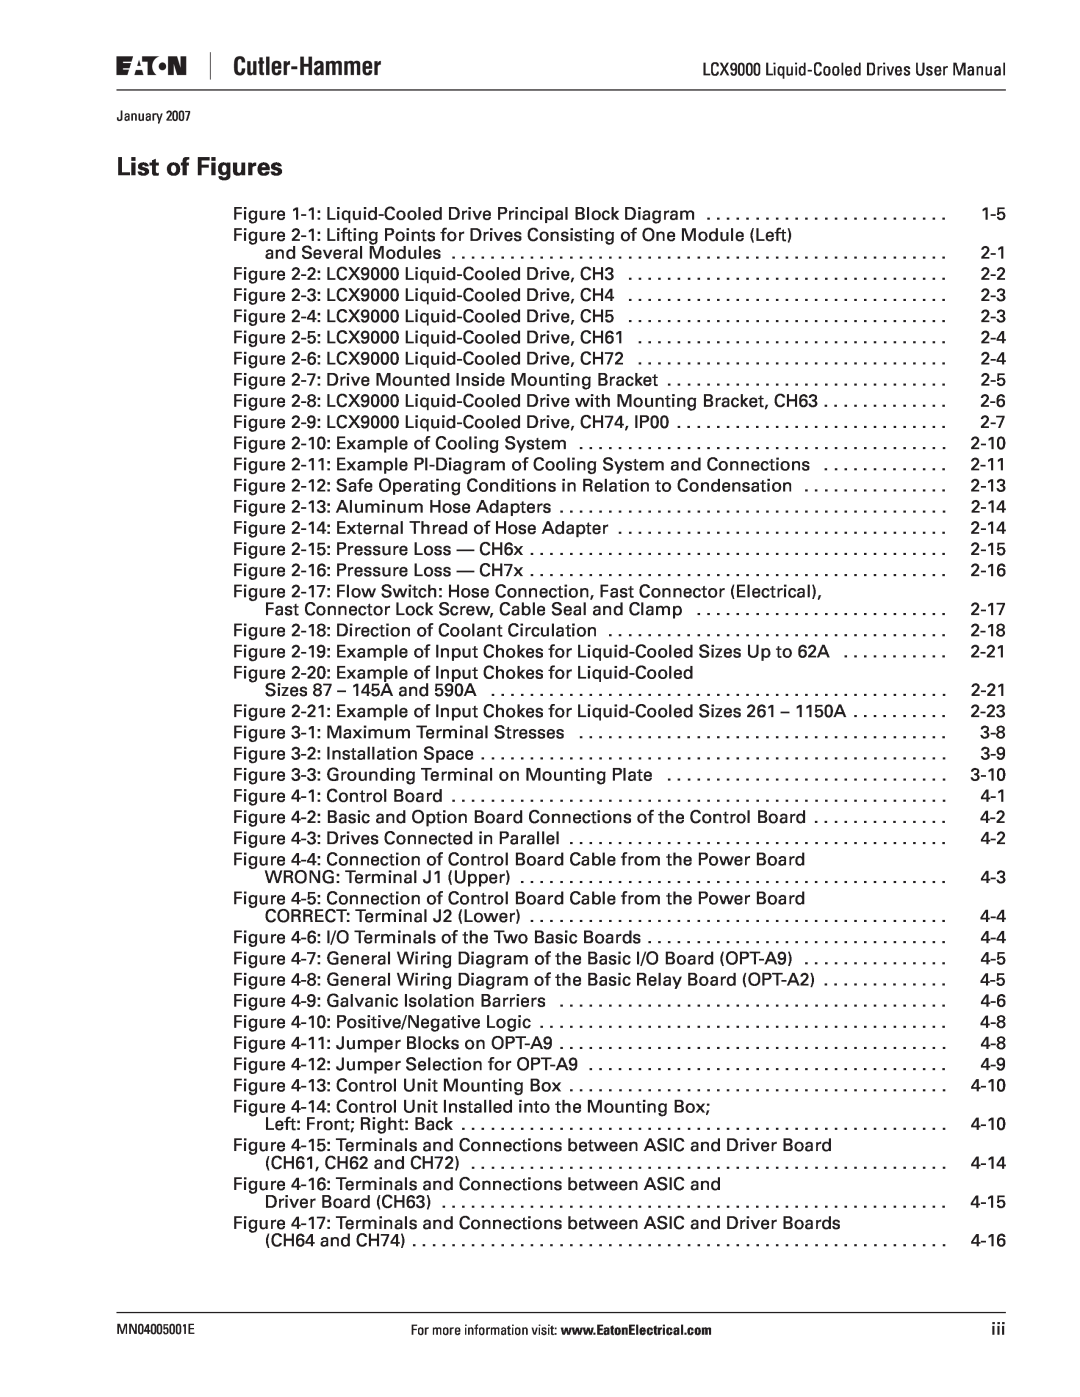 J. T. Eaton LCX9000 user manual List of Figures 